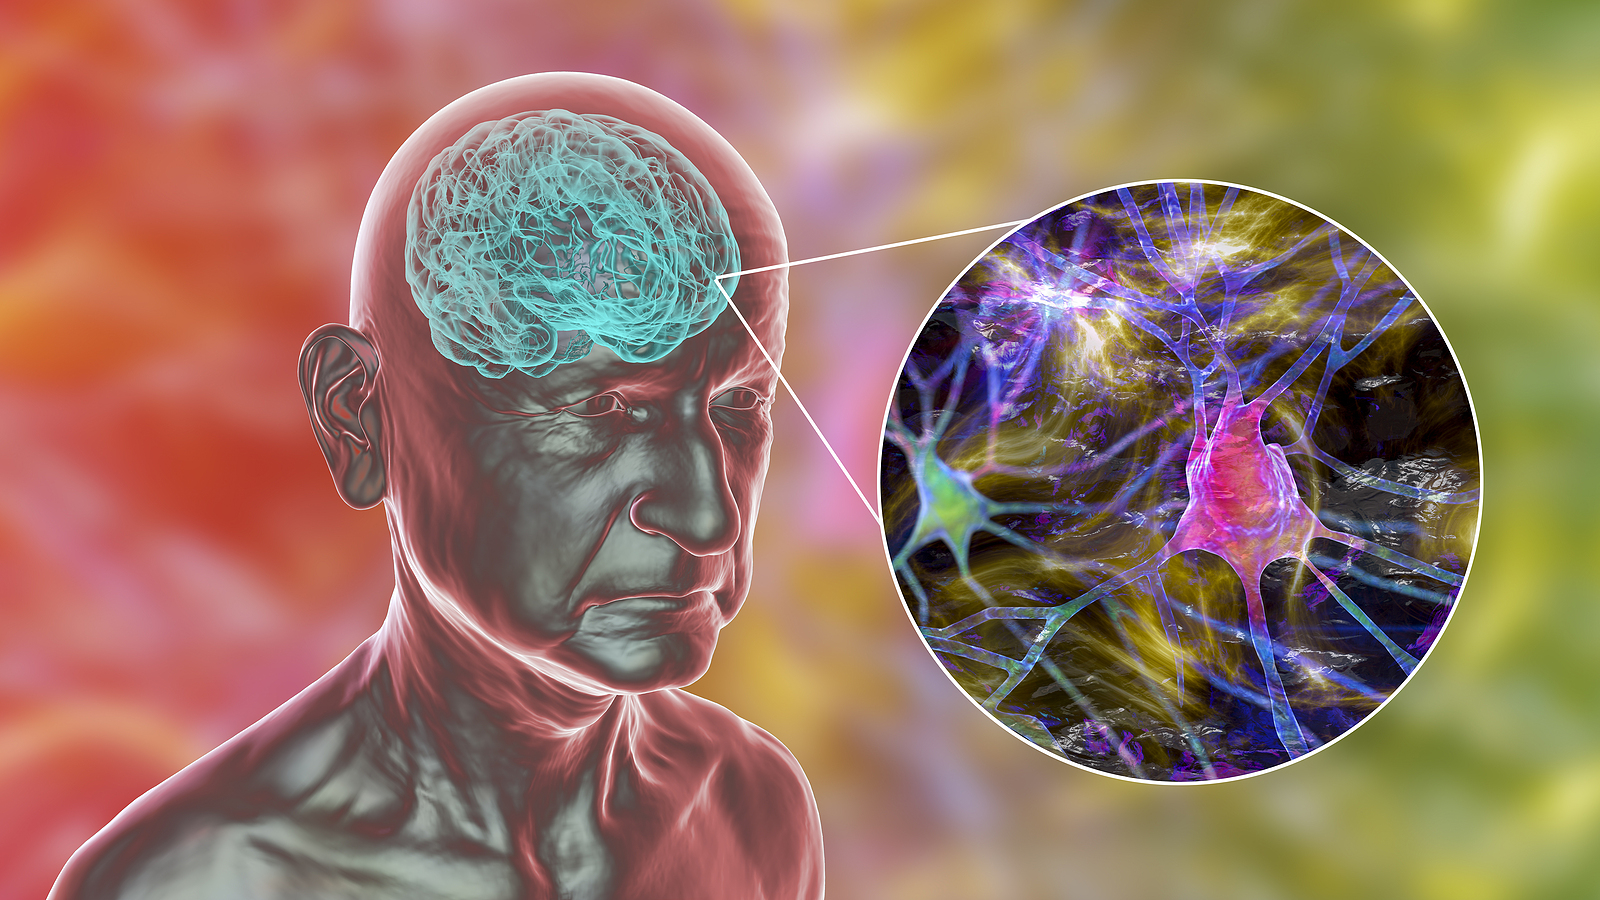 What Is Frontotemporal Dementia And What Are The Symptoms?